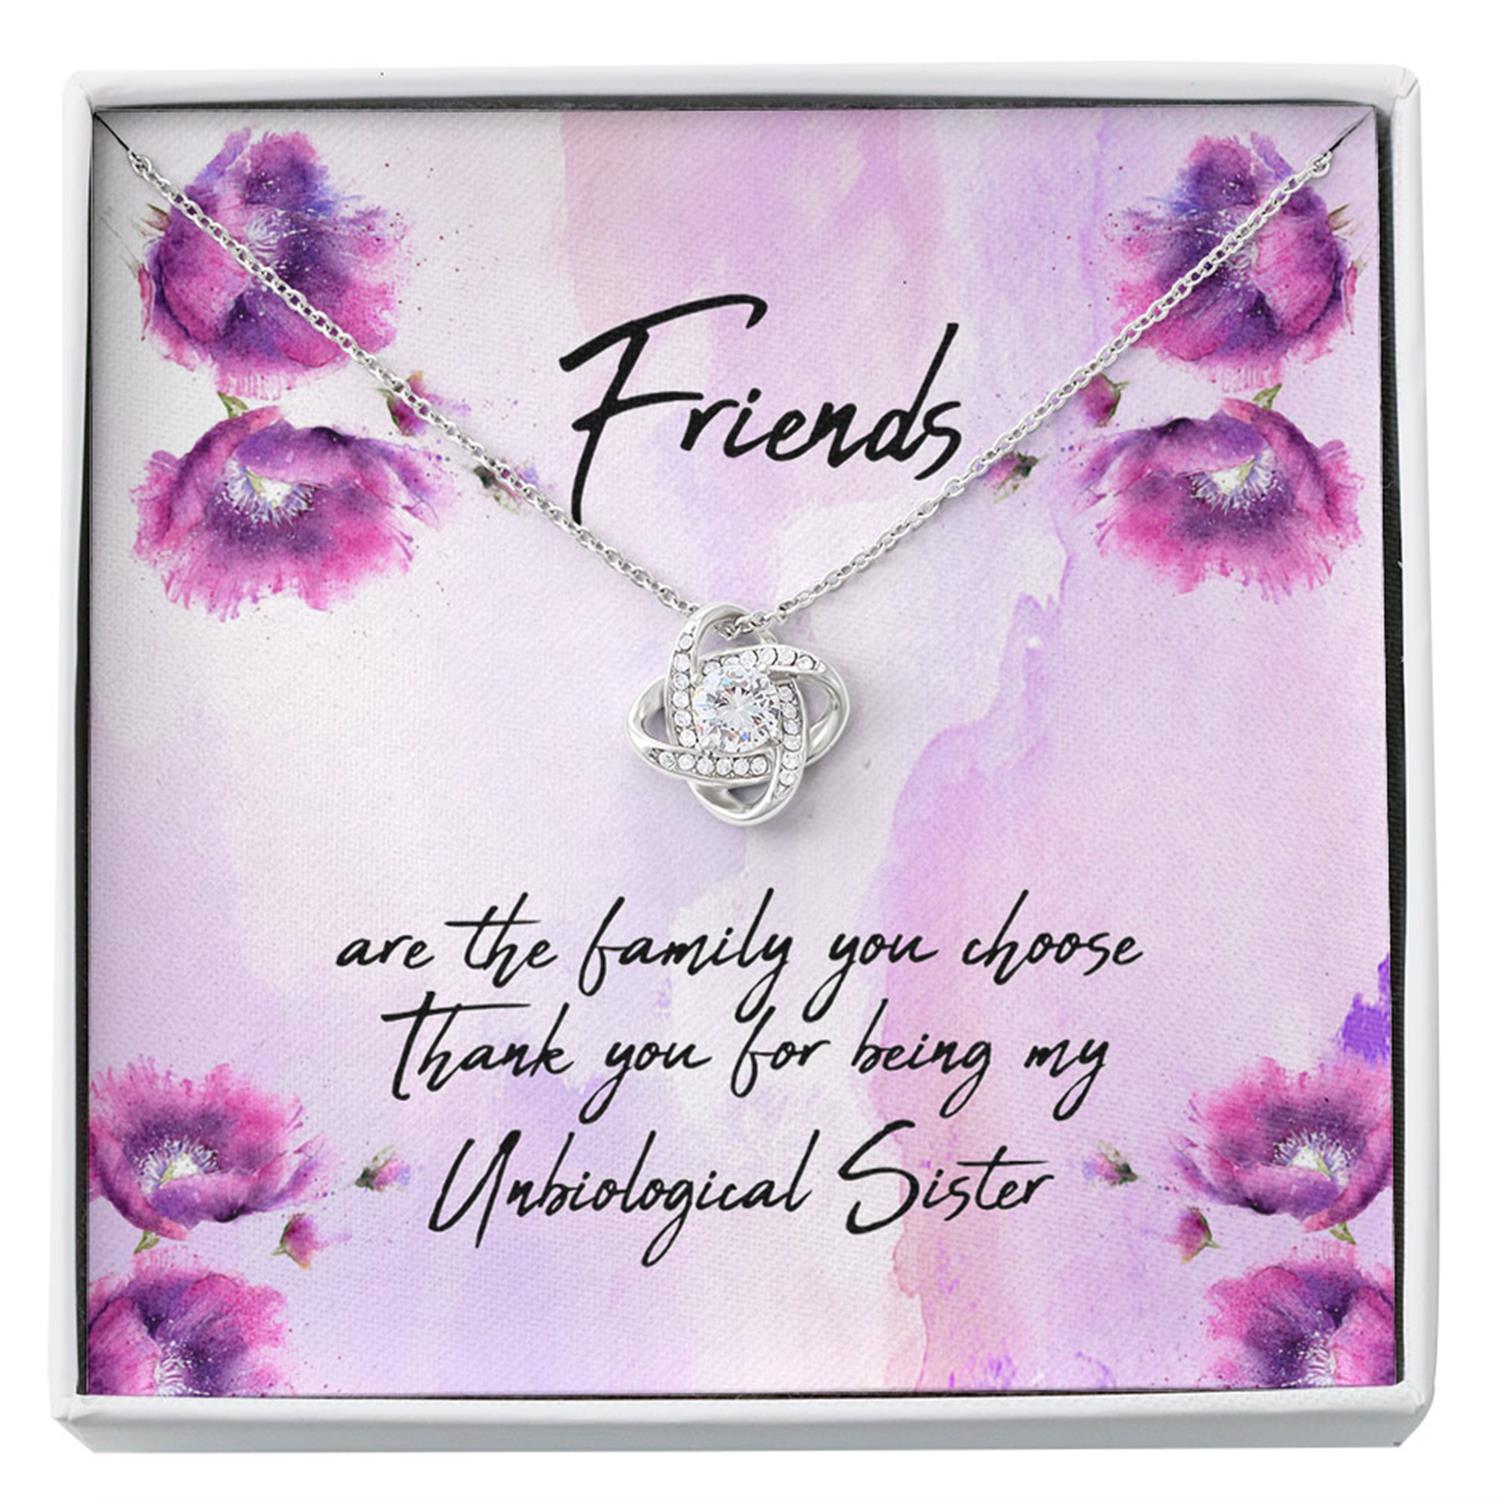 Unbiological Sister Friendship Necklace – Reflection of Memories